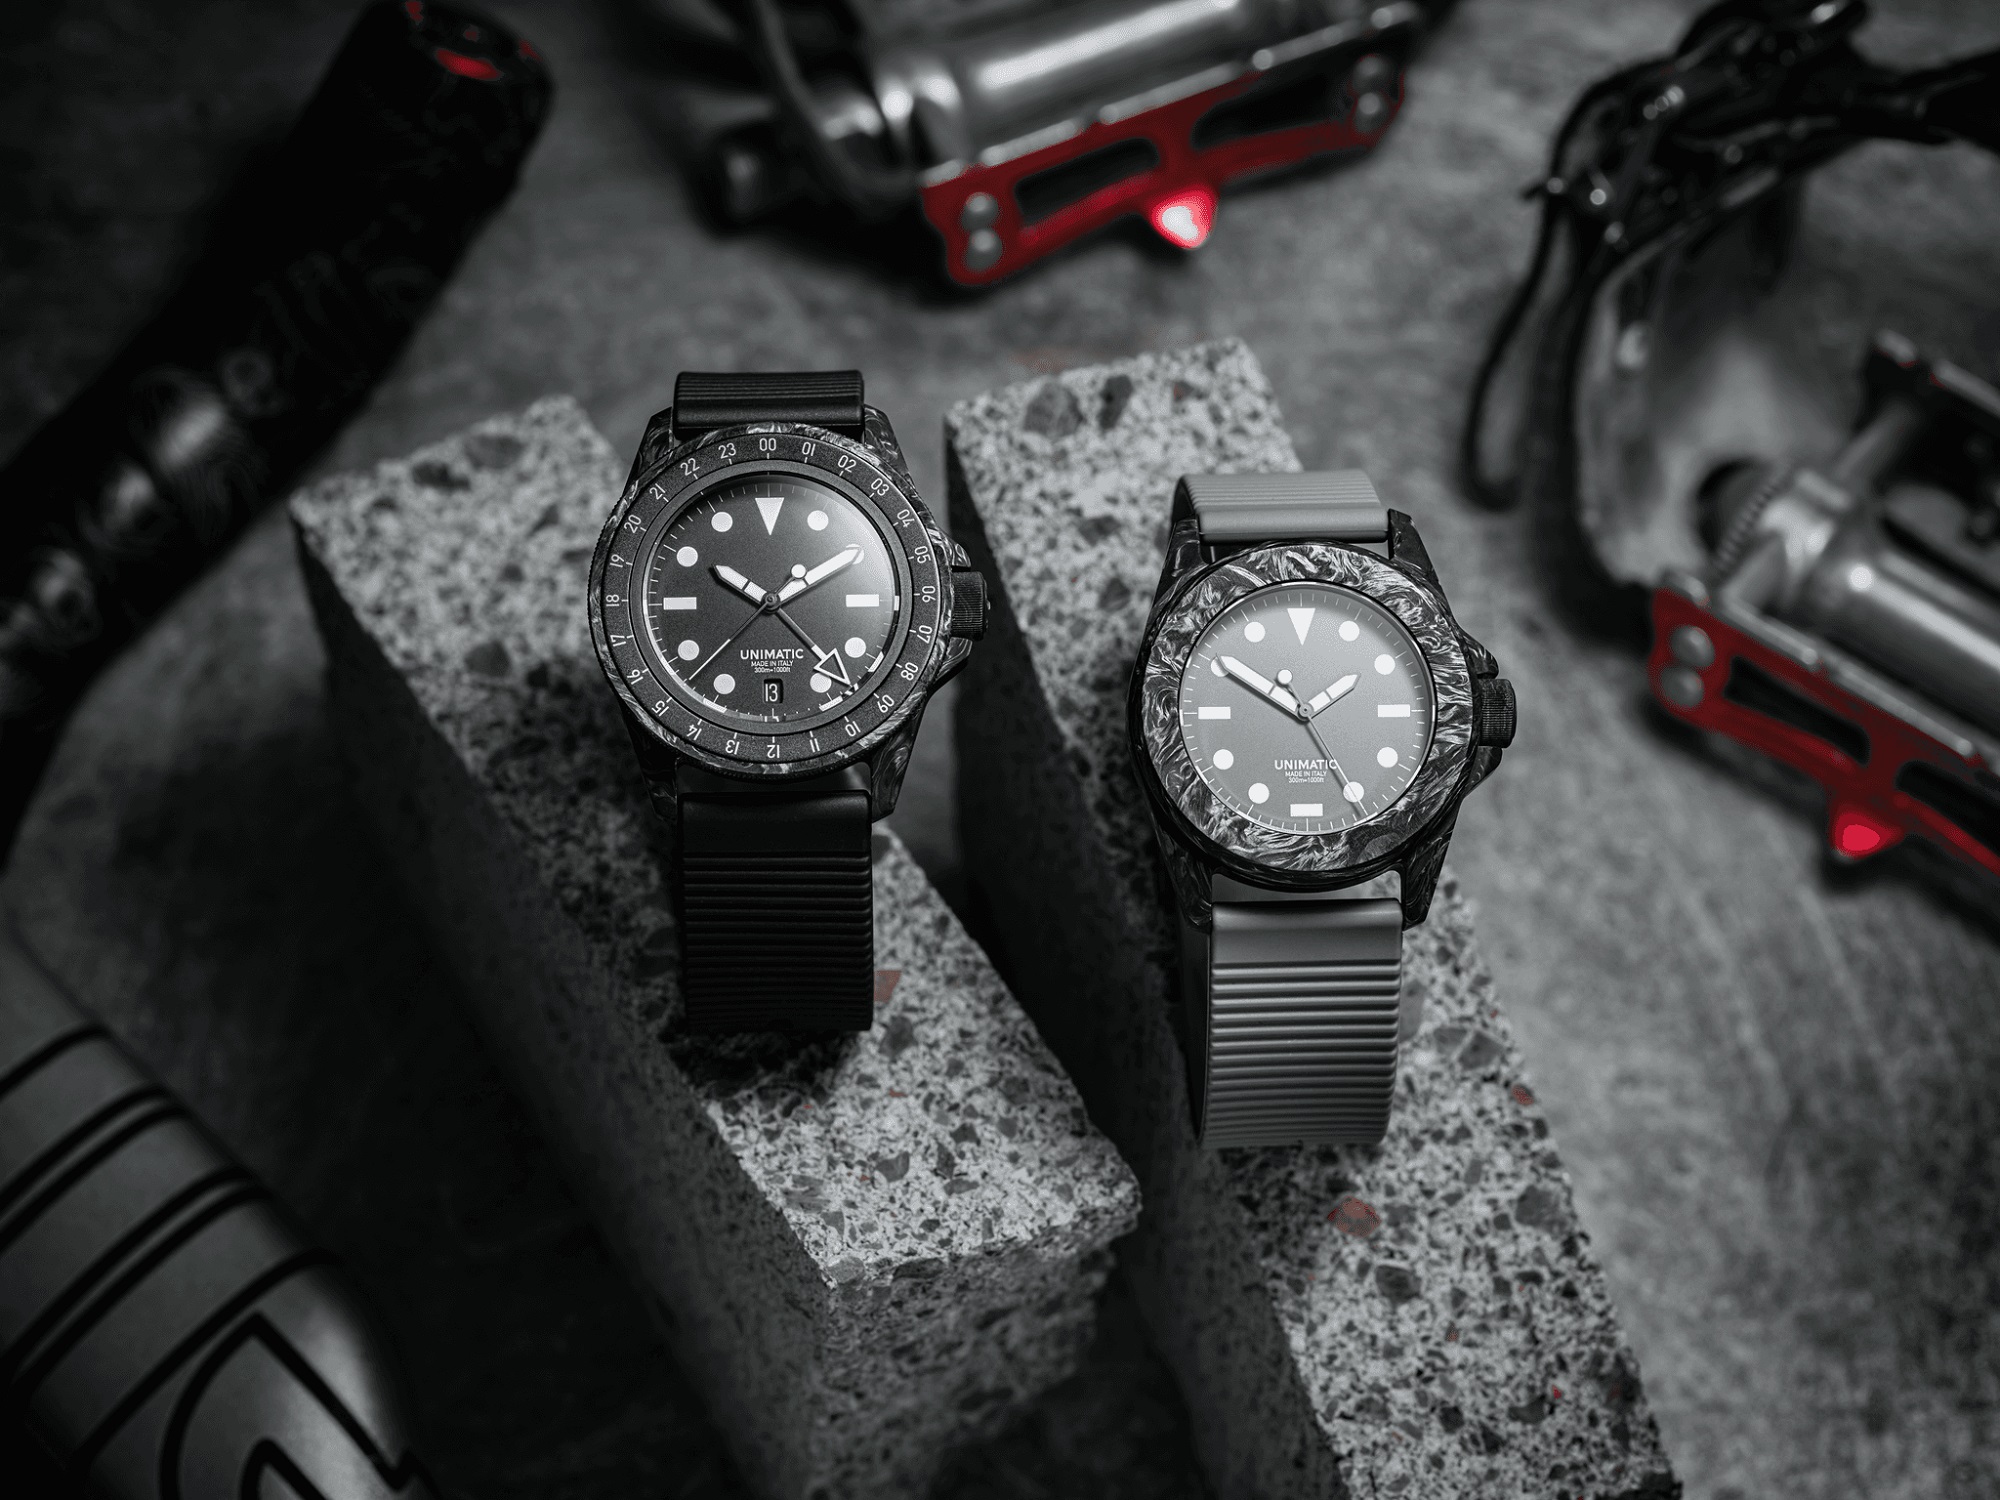 Hodinkee Unimatic collaboration watches on black and gray stone